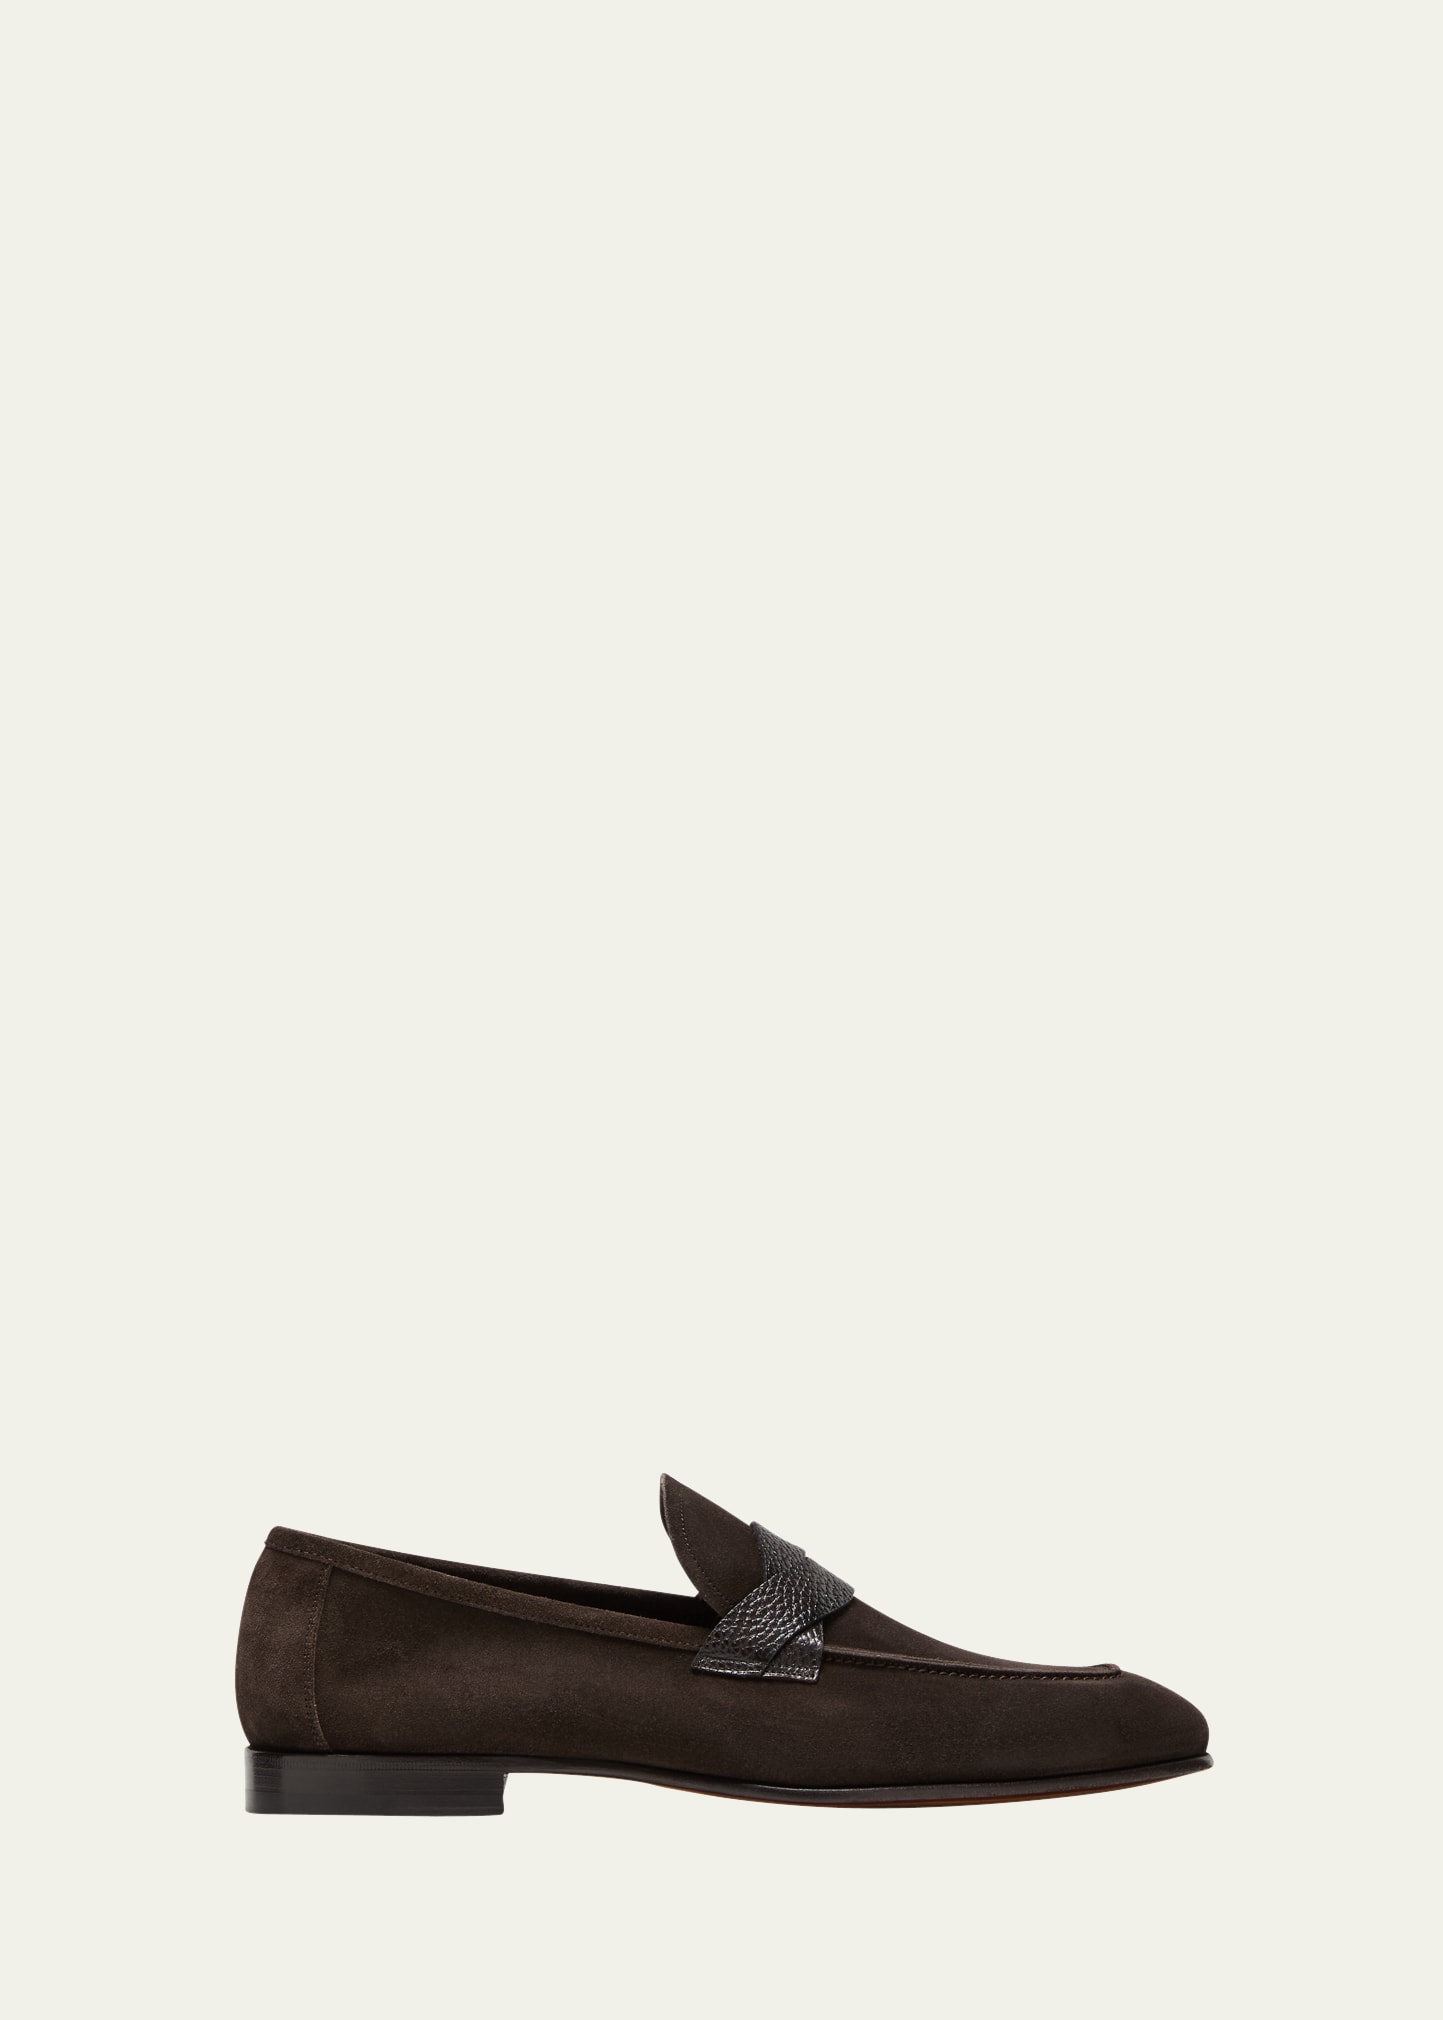 Tom Ford Men's Sean Twisted Keeper Suede Penny Loafers In Coffee